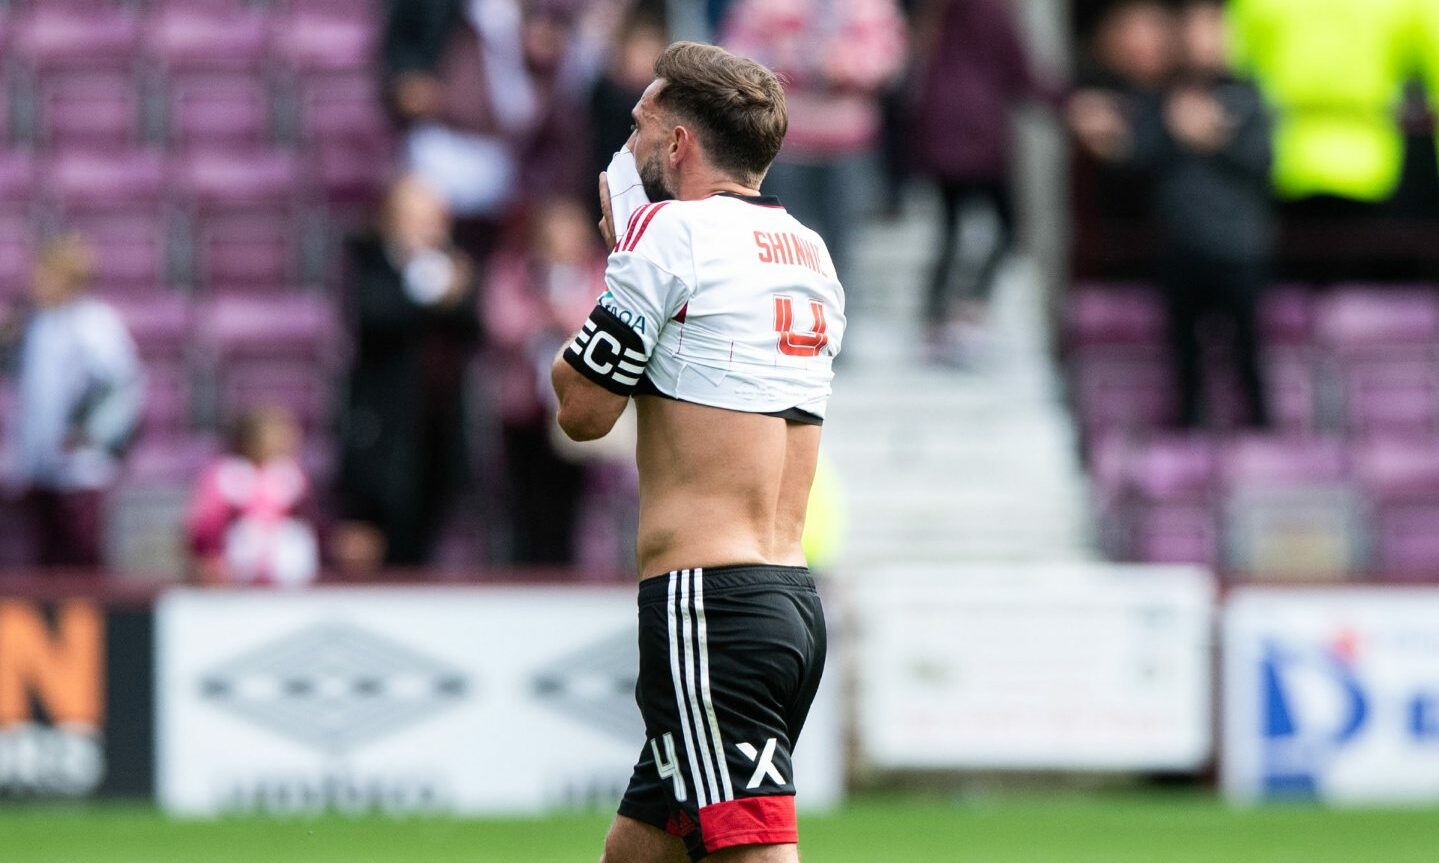 Aberdeen captain Graeme Shinnie wiping his face with the hem of his shirt